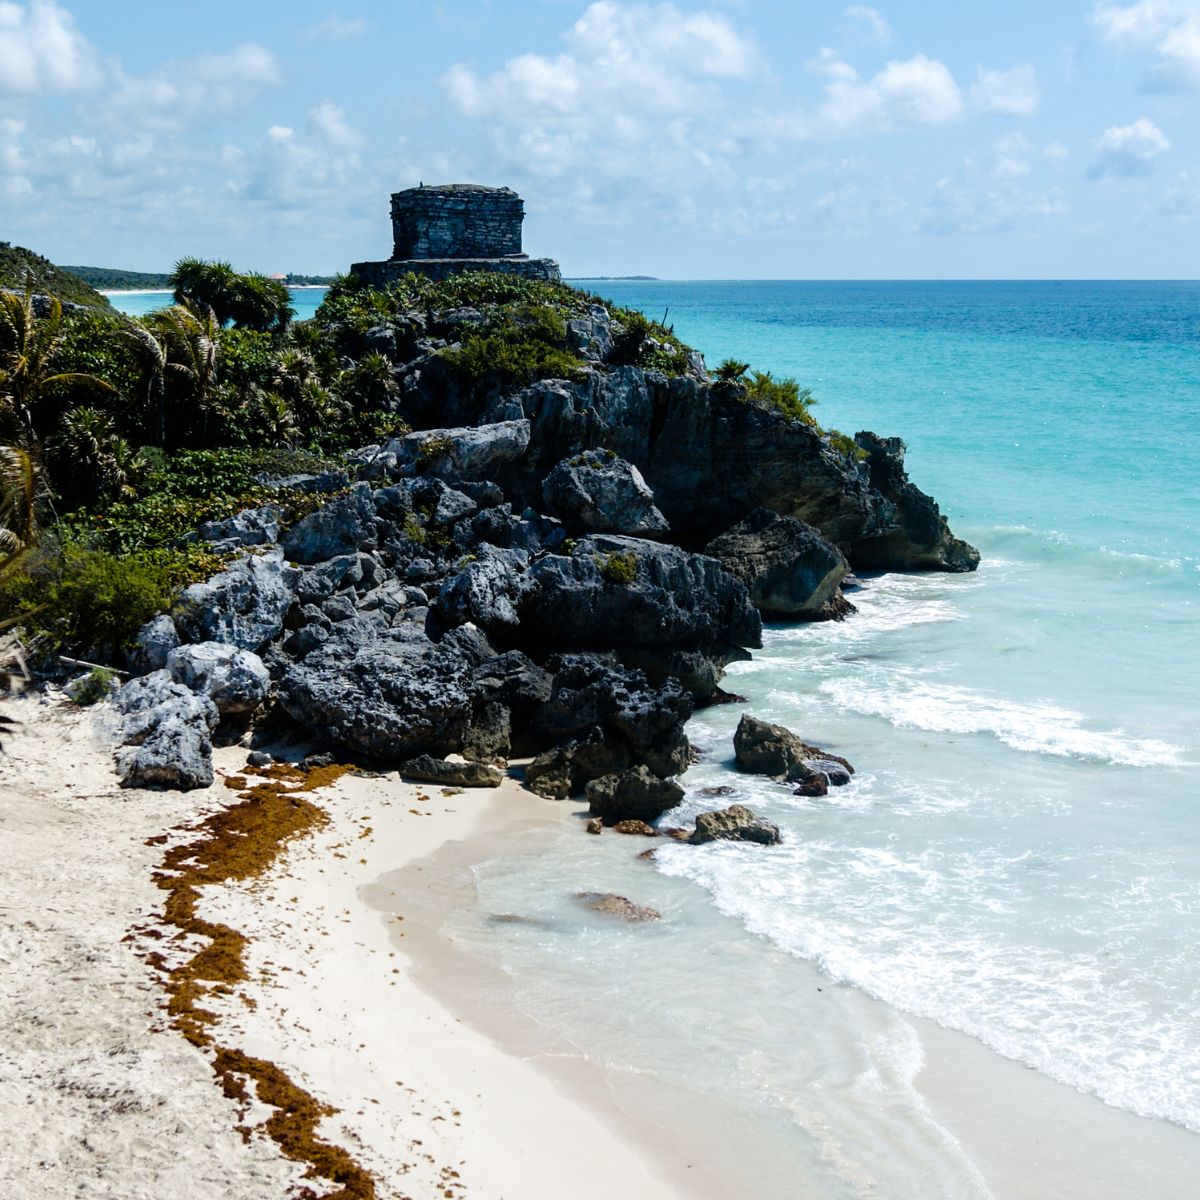 10 Reasons Why Foreign Retirees Should Consider Buying Property in Tulum, Playa del Carmen, or Puerto Aventuras